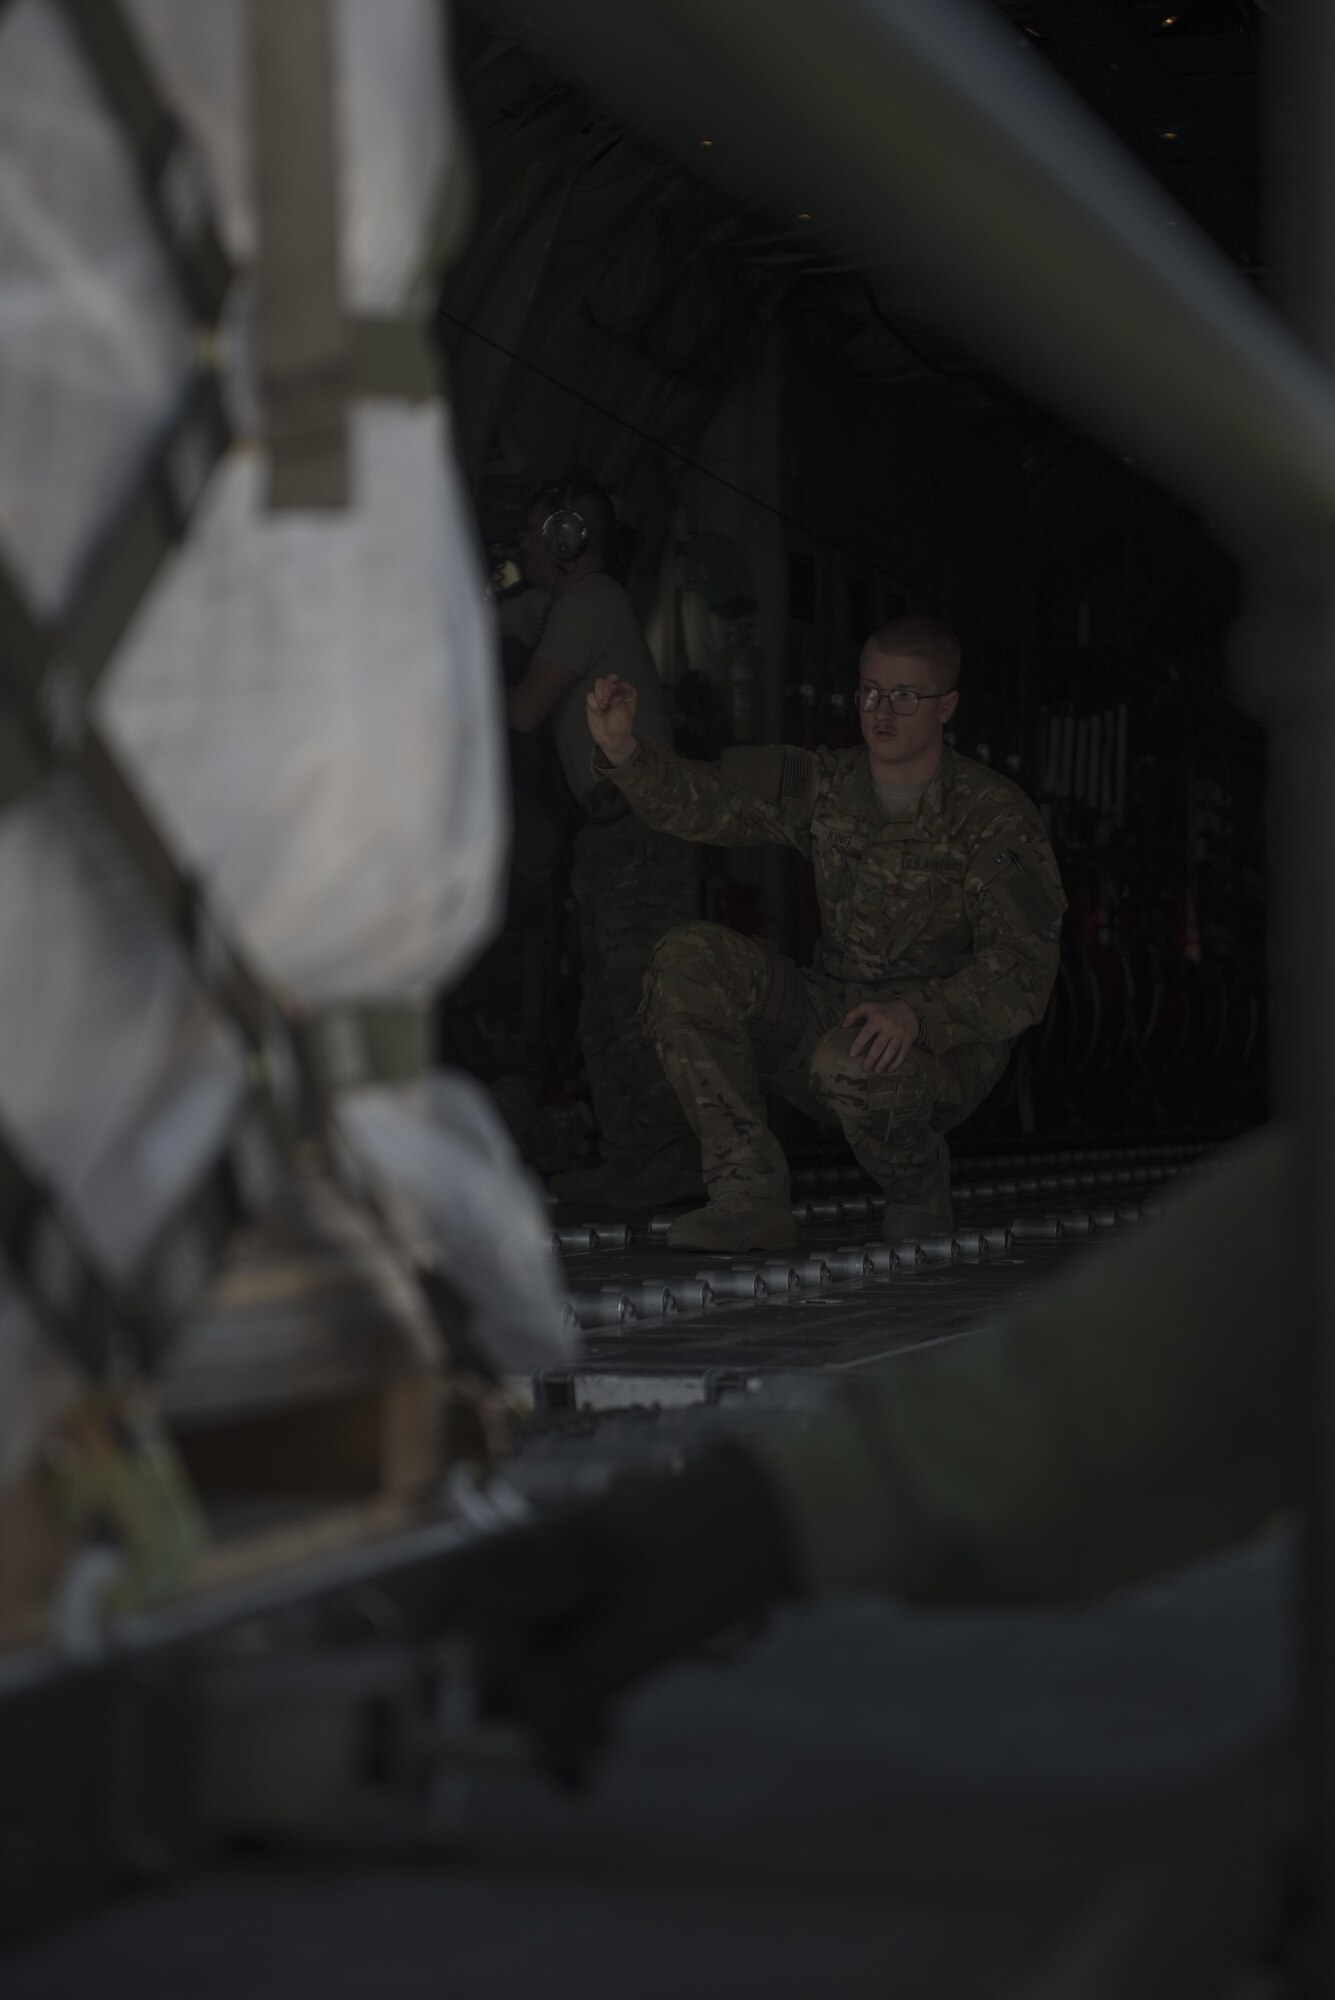 Senior Airman Brandon King, a 774th Expeditionary Airlift Squadron loadmaster, directs the placement of cargo on a C-130J Super Hercules at Bagram Airfield, Afghanistan, May 5, 2017. The 774th EAS provides tactical airlift capabilities in the Afghan theater, which often involves non-standard or outsized cargo and personnel movement. (U.S. Air Force photo by Staff Sgt. Benjamin Gonsier)